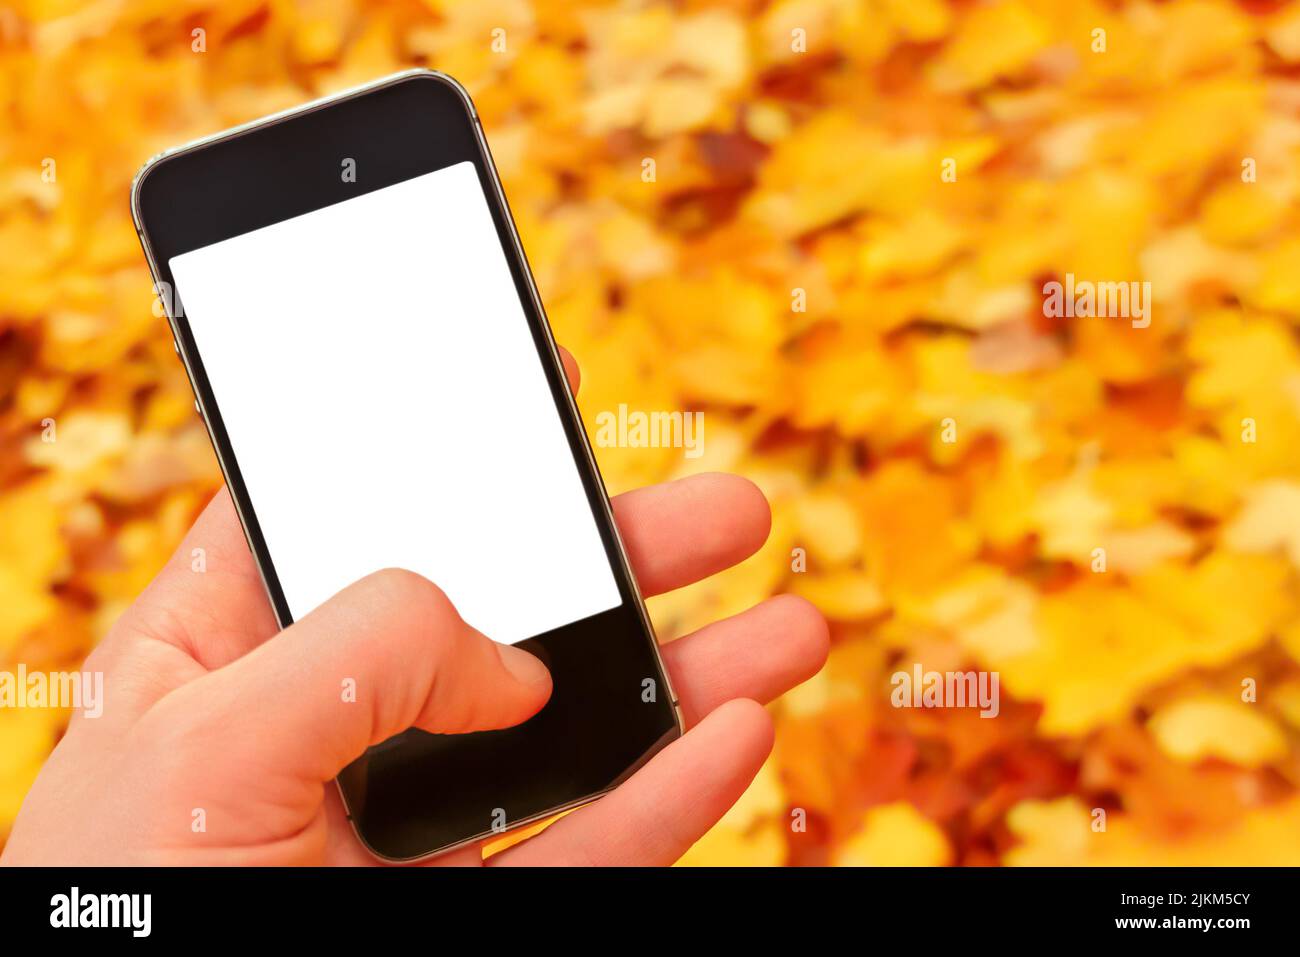 Autumn mobile phone mockup hand holding smartphone nature phone screen mockup smartphone blank screen hand phone blur background leaves falling sale Stock Photo